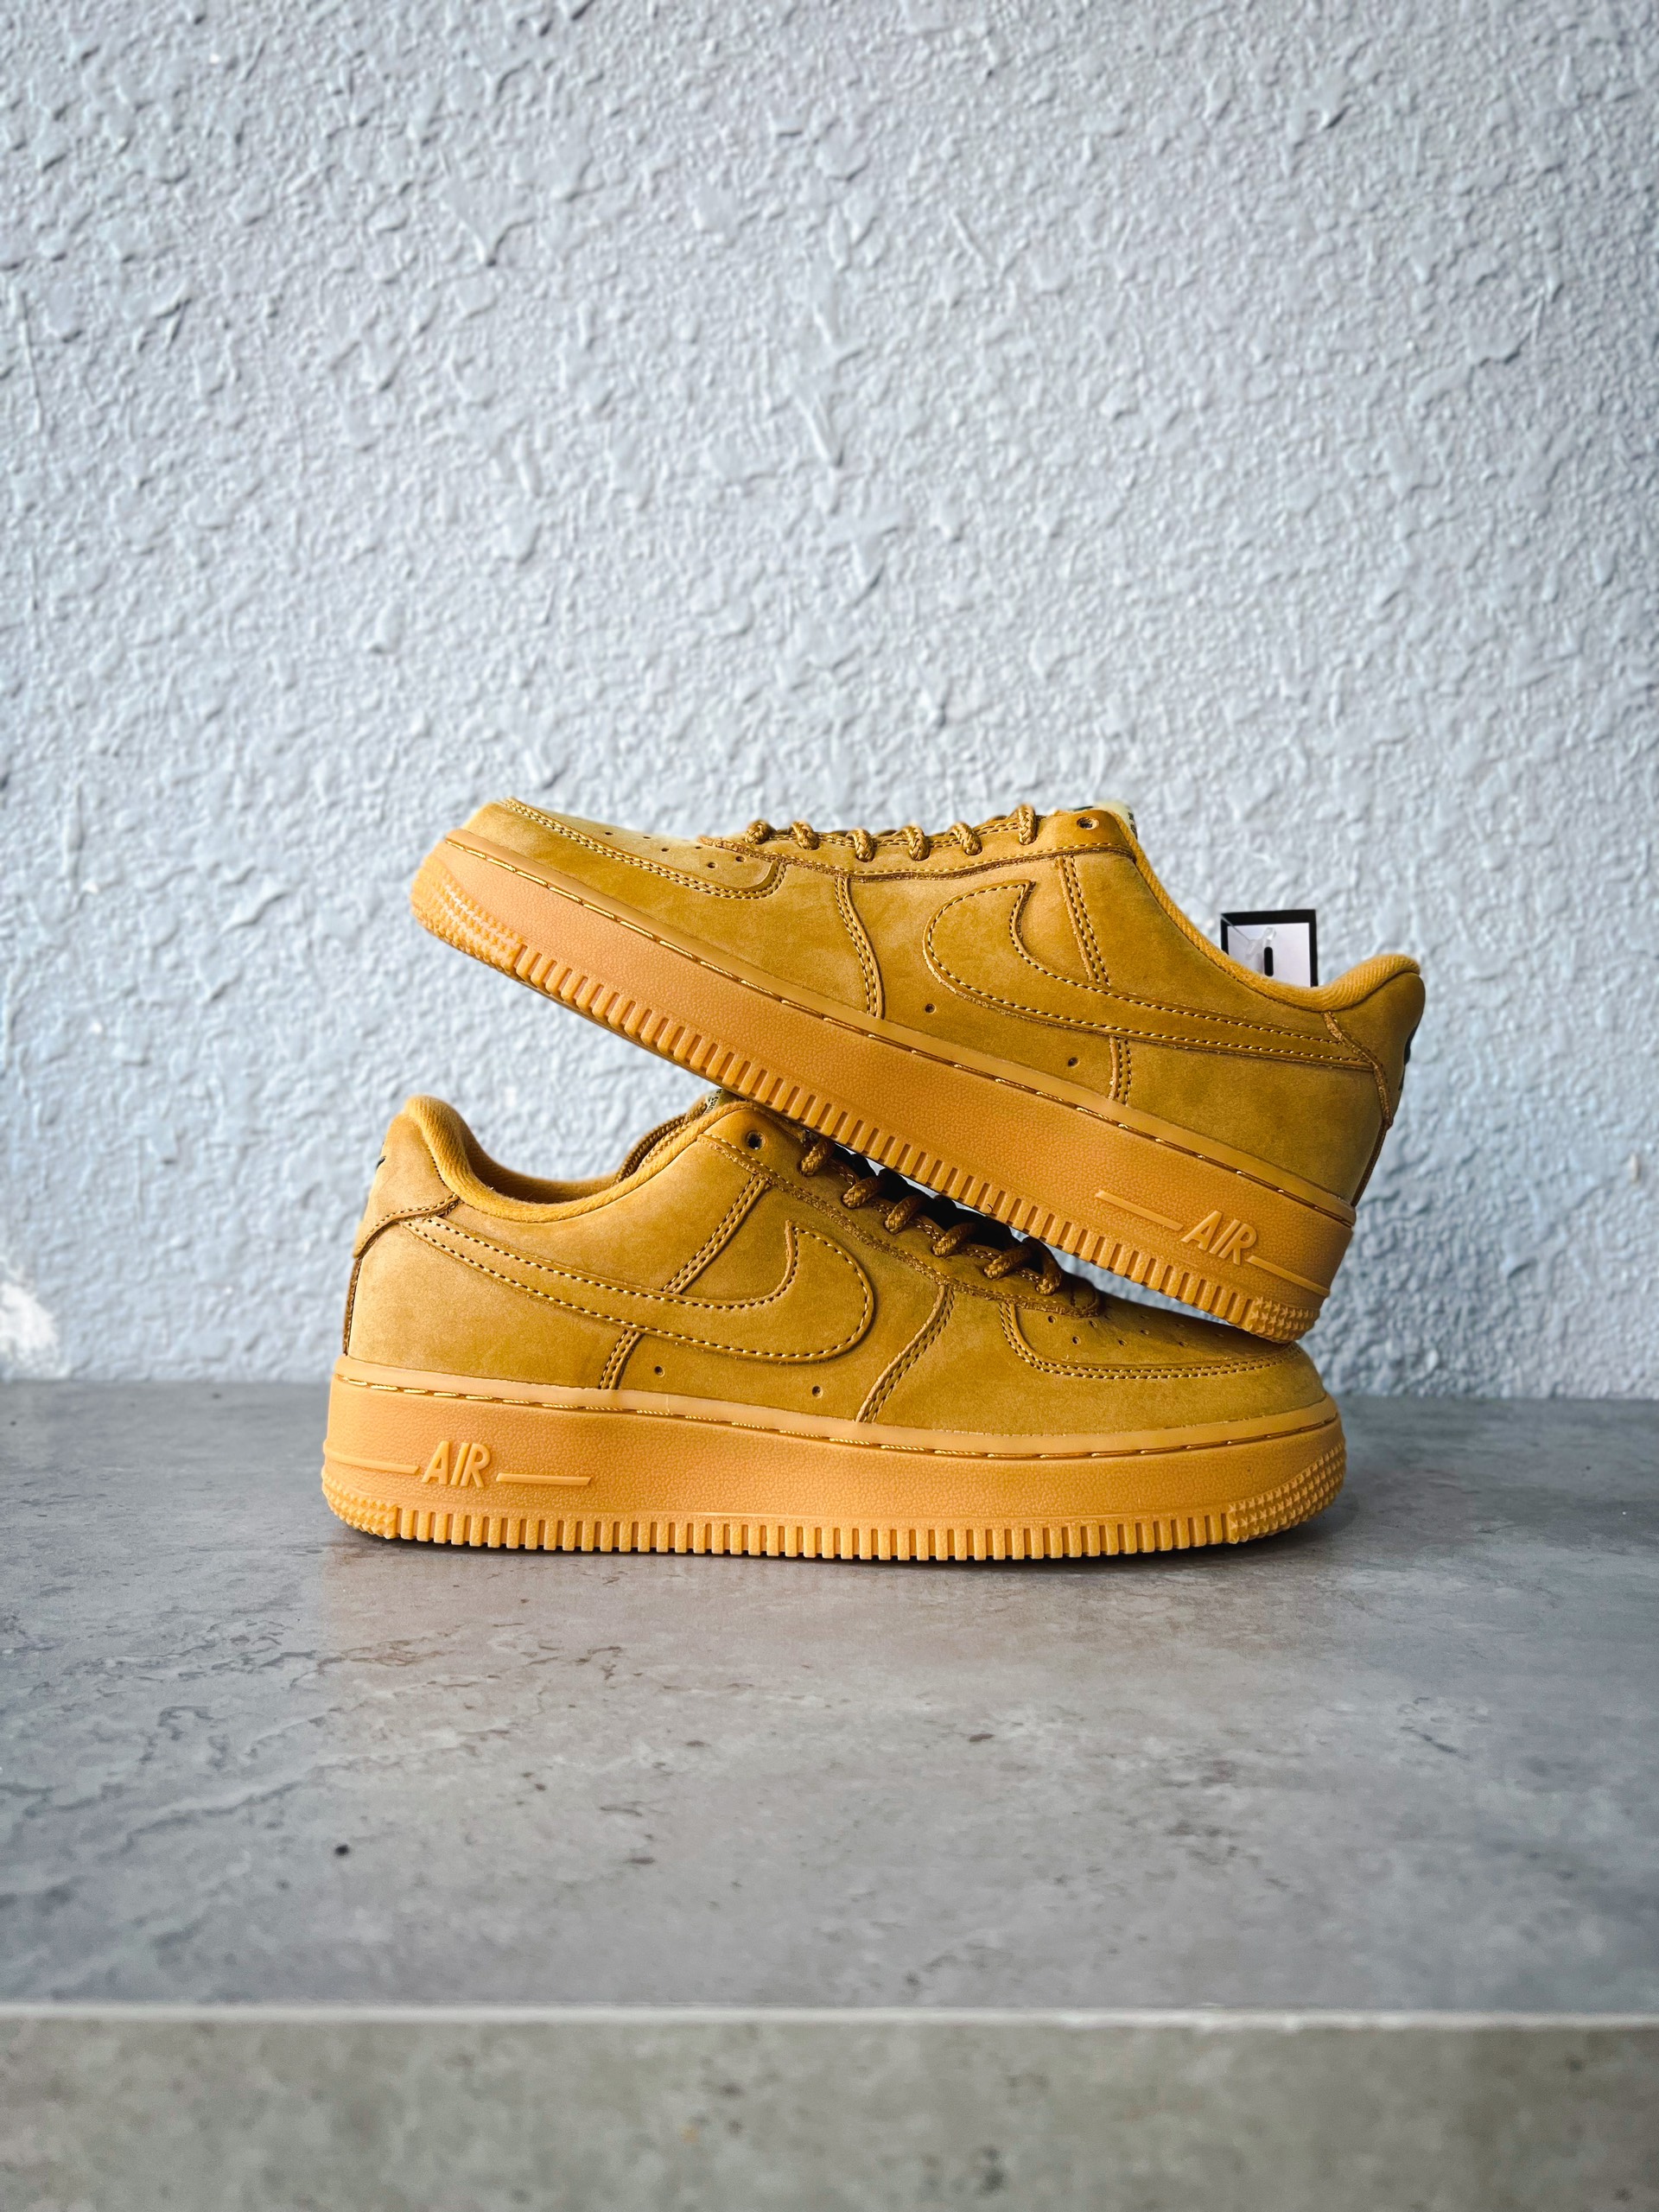 Nike Air Force 1 Low Flax 1:1